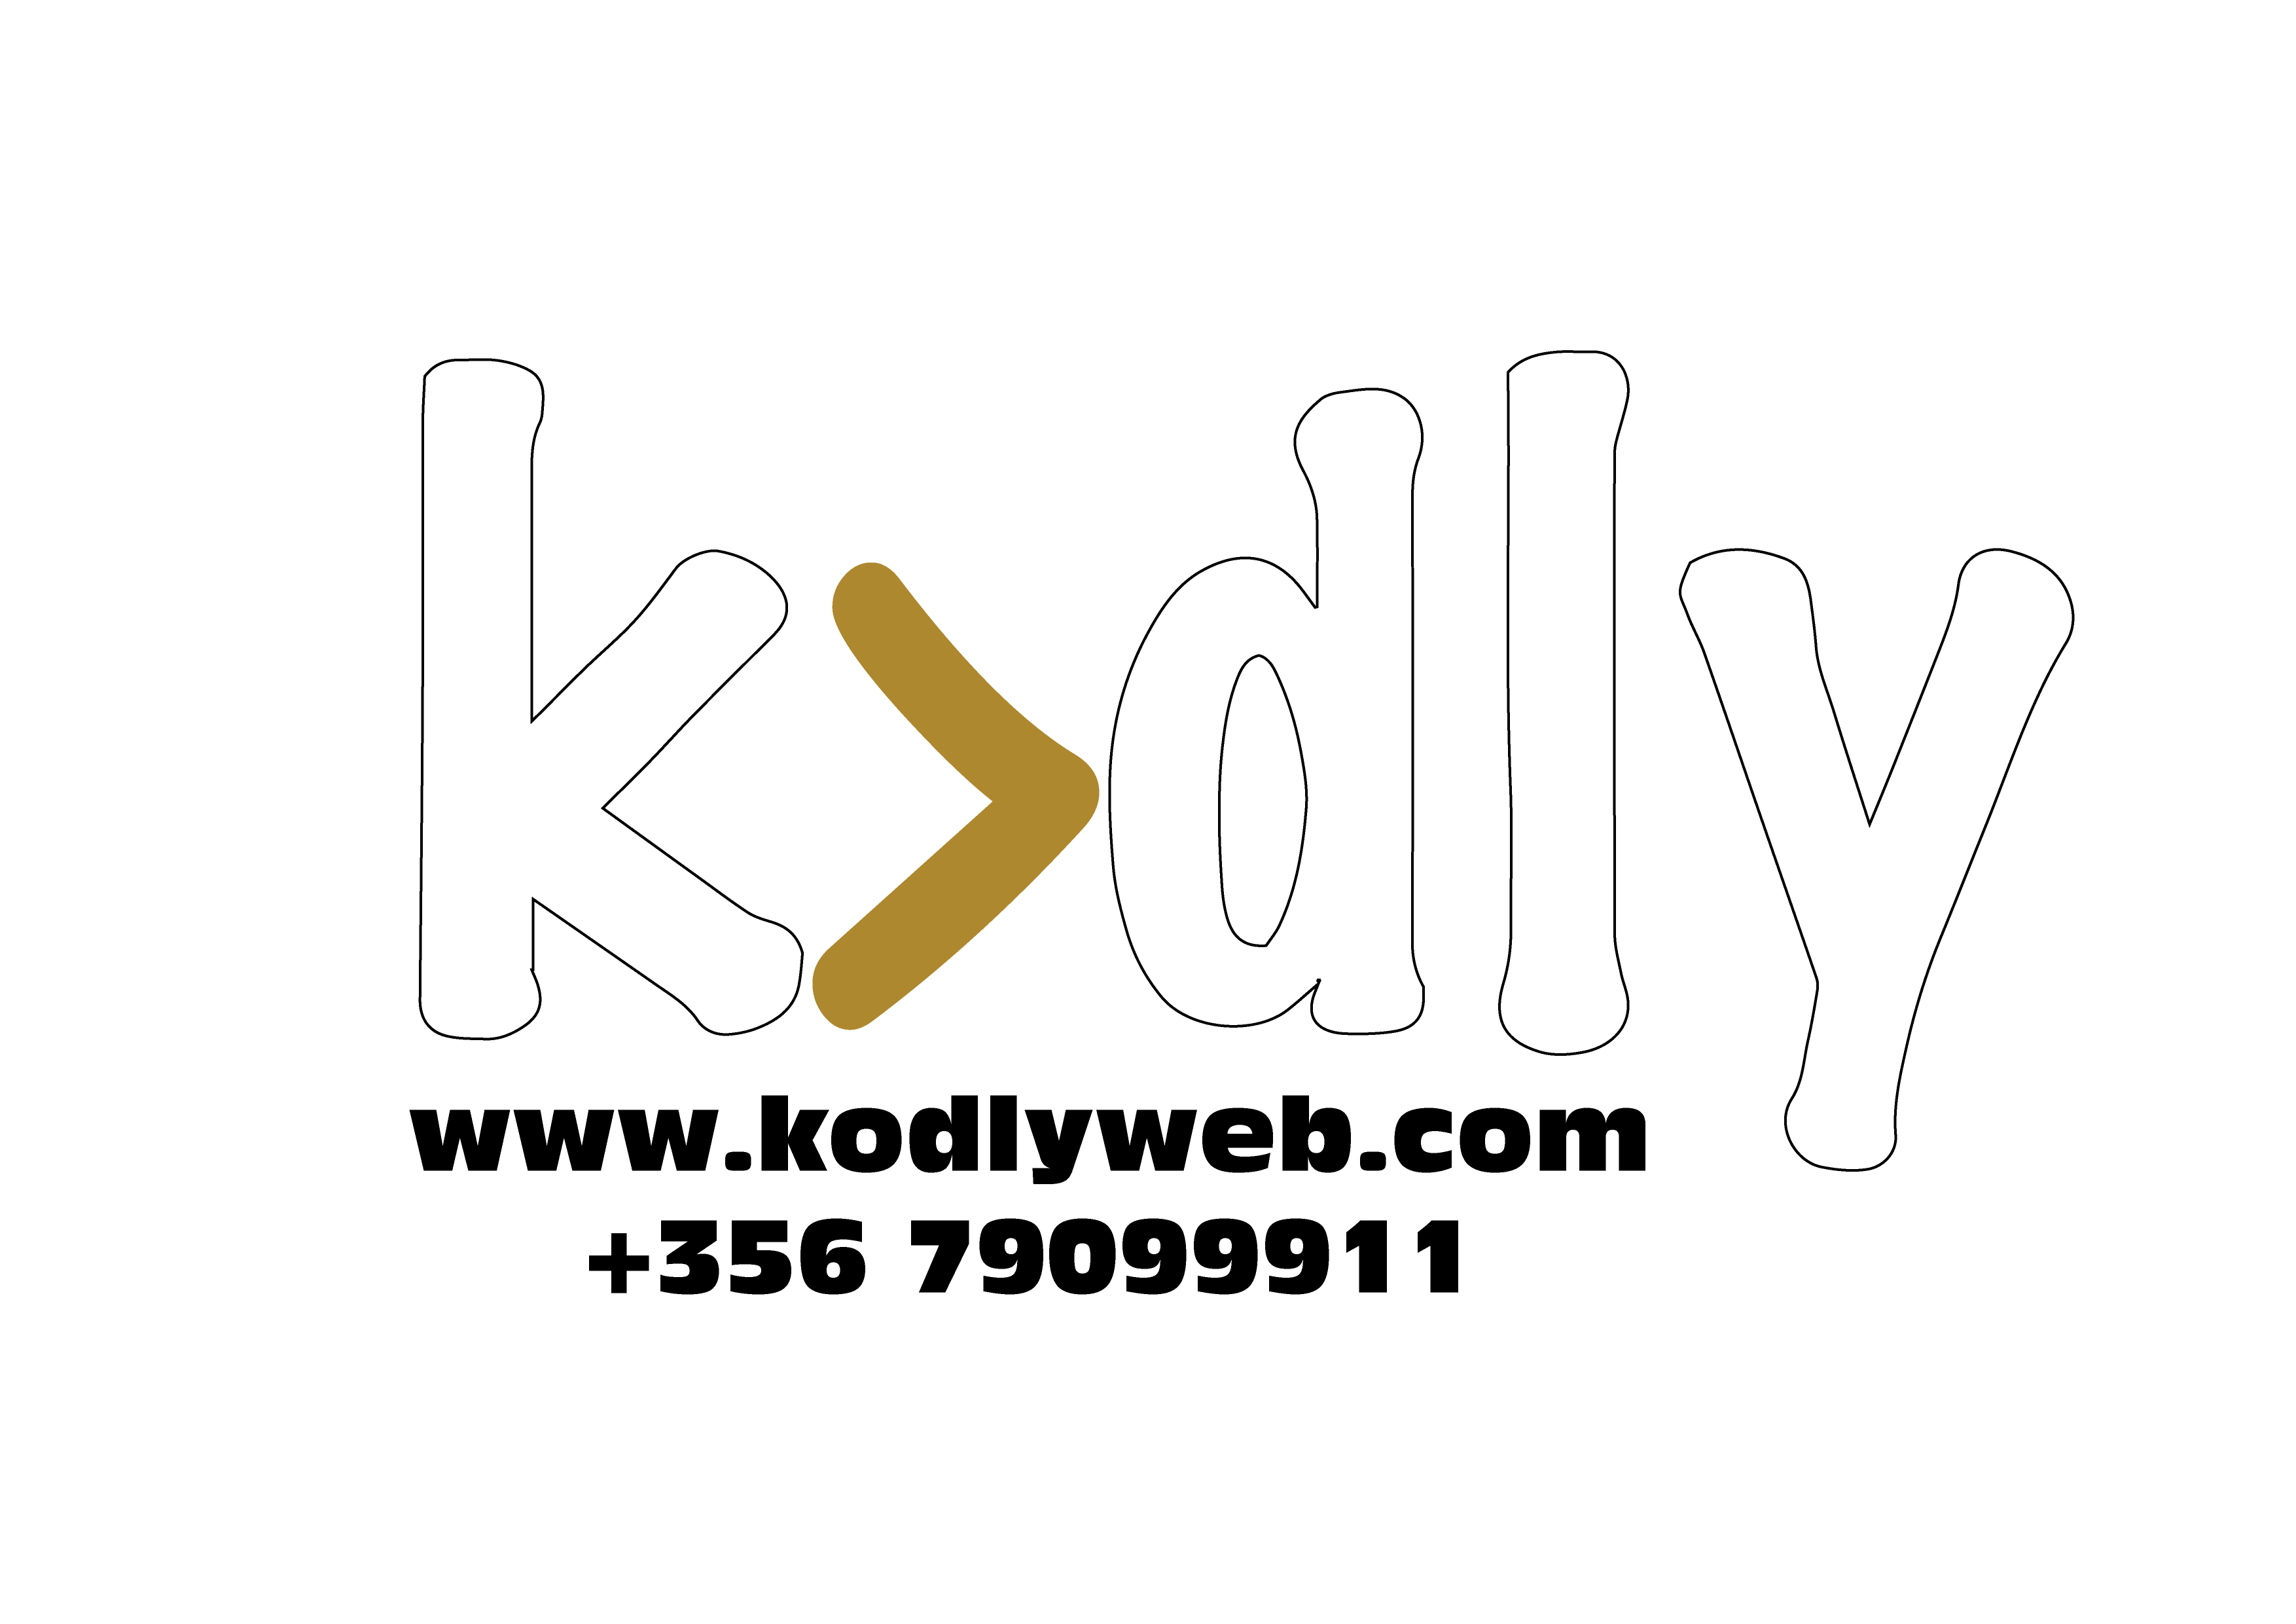 Kodly all you need under one roof. Website Development, Website Hosting, Printing Services, CNC, Laser Engraving, 3D Mapping, Projection Mapping, Digital Marketing, Lightning shows in Malta.